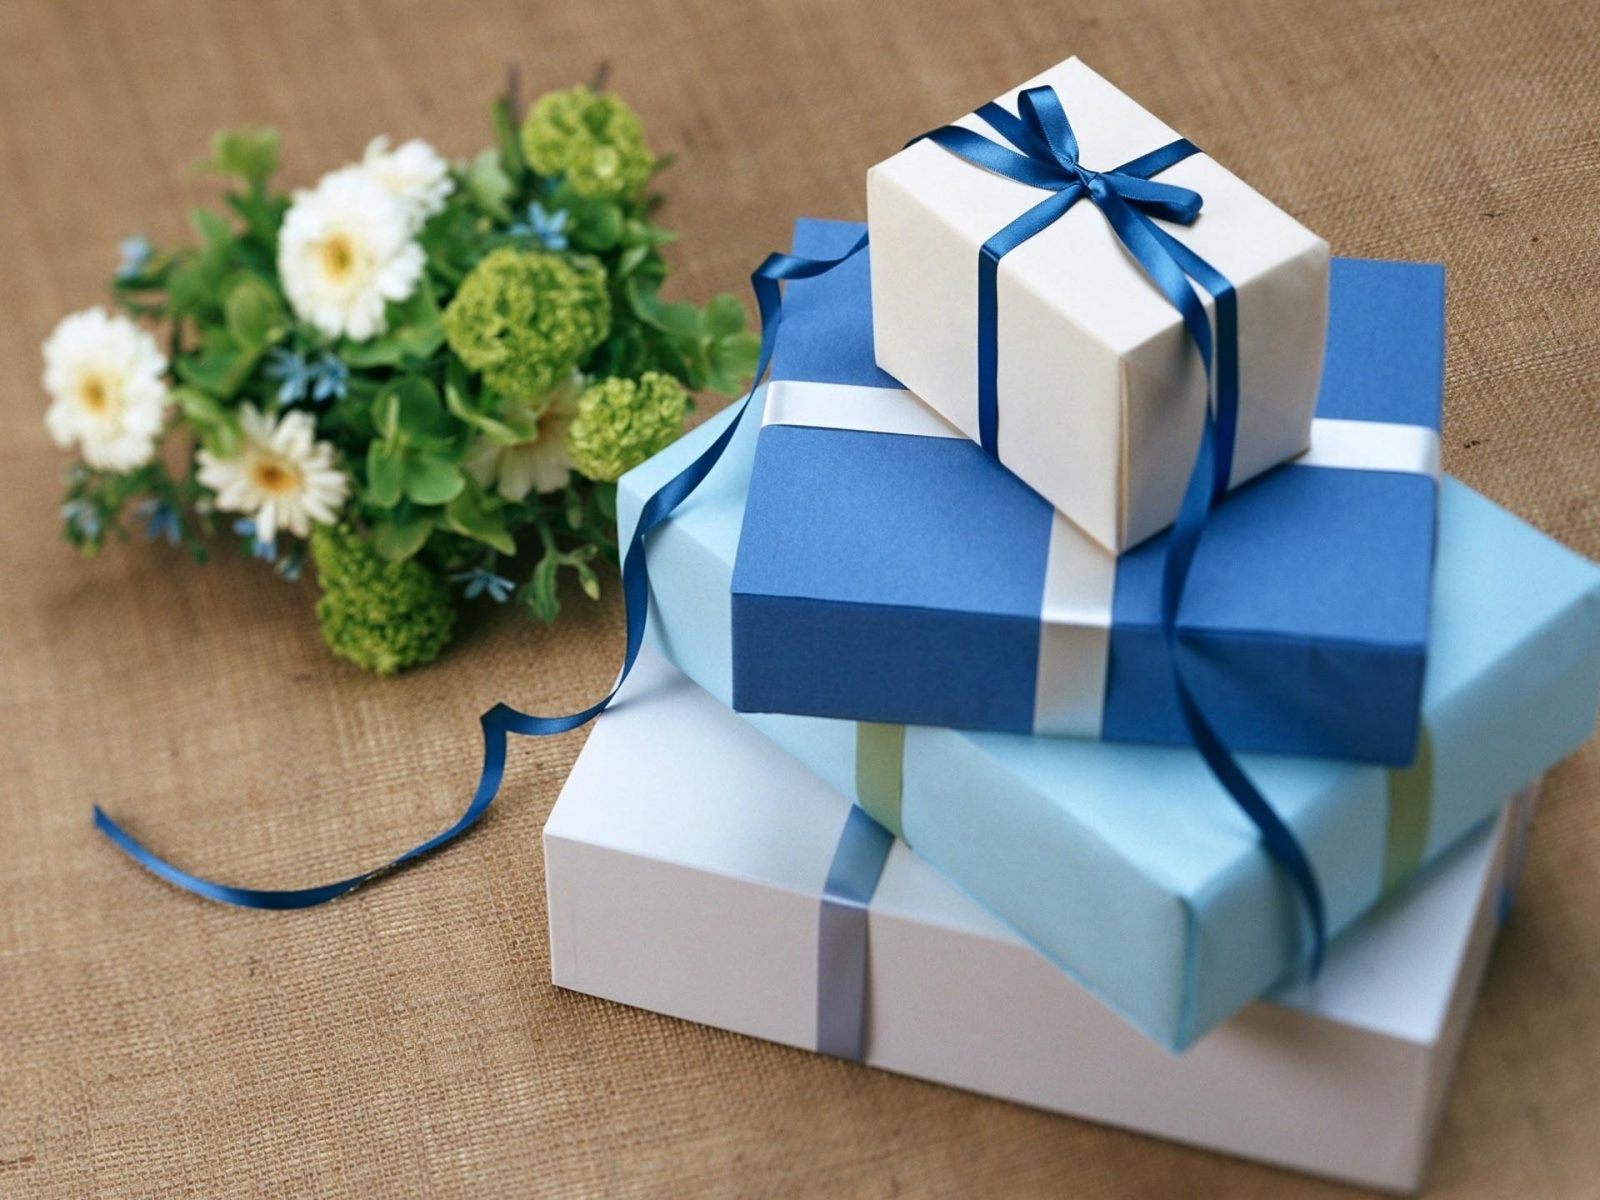 Several gift boxes near the white flowers